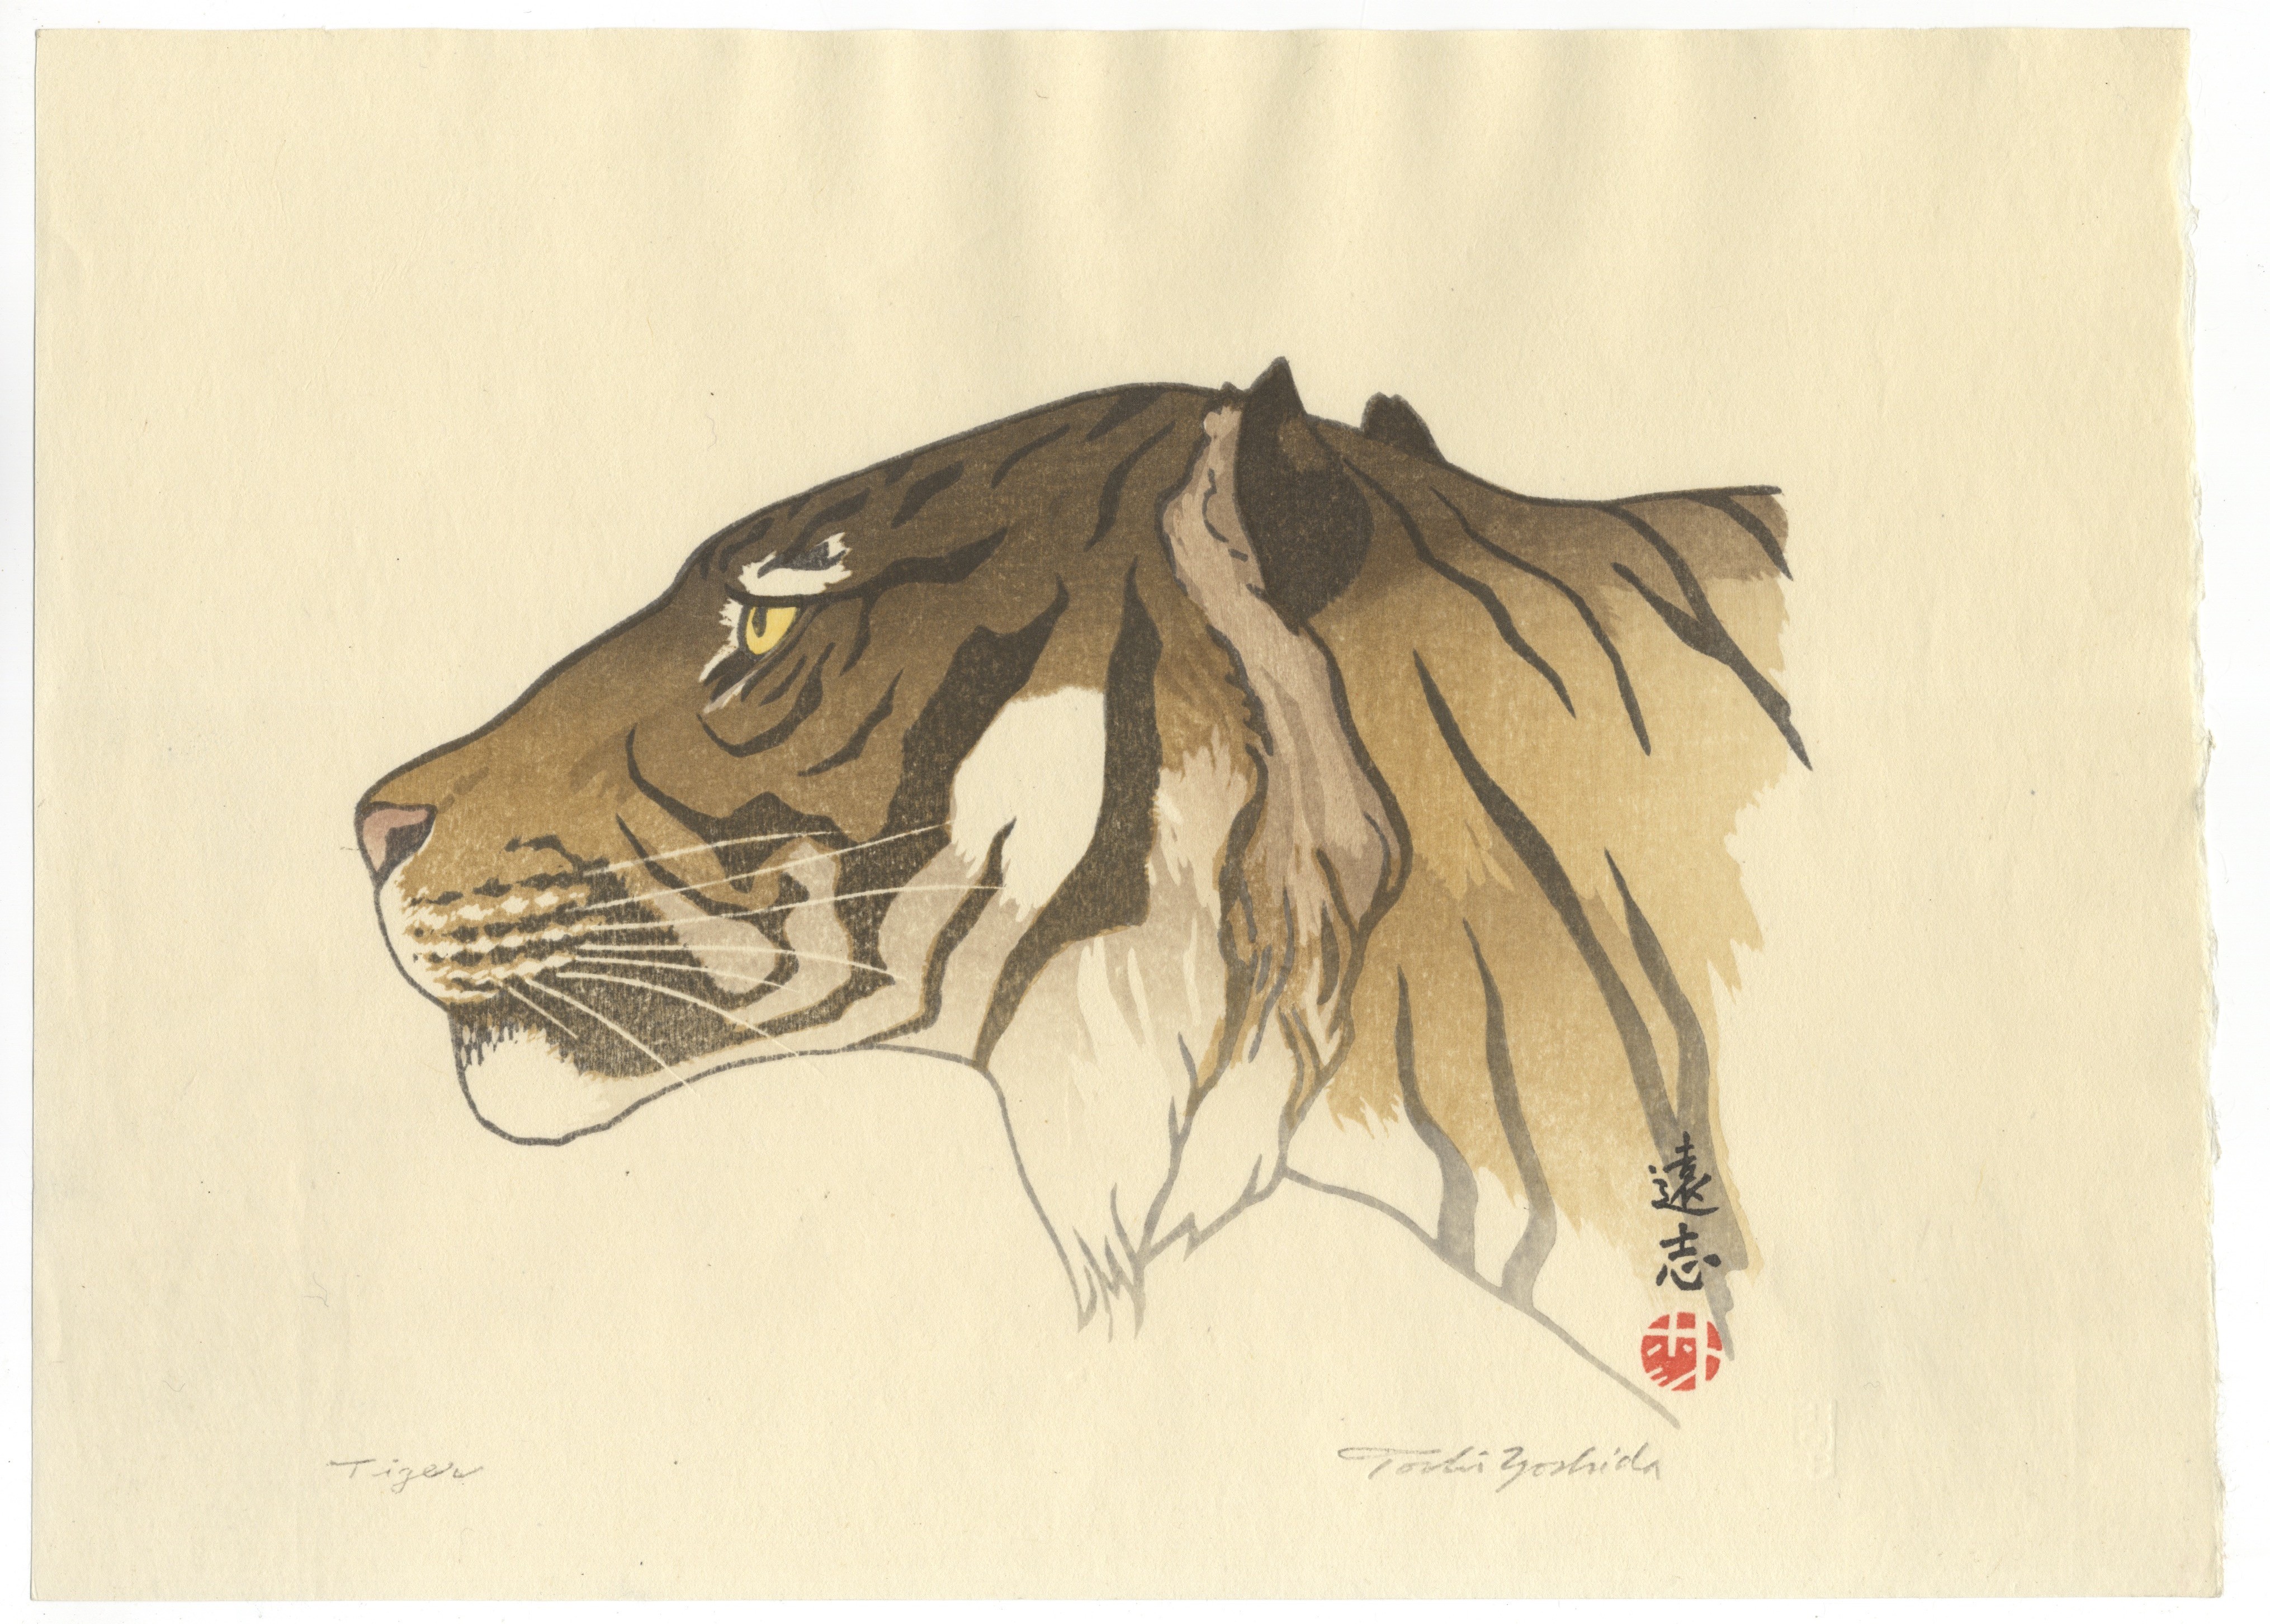 Take Courage - Welcoming The Year of the Tiger